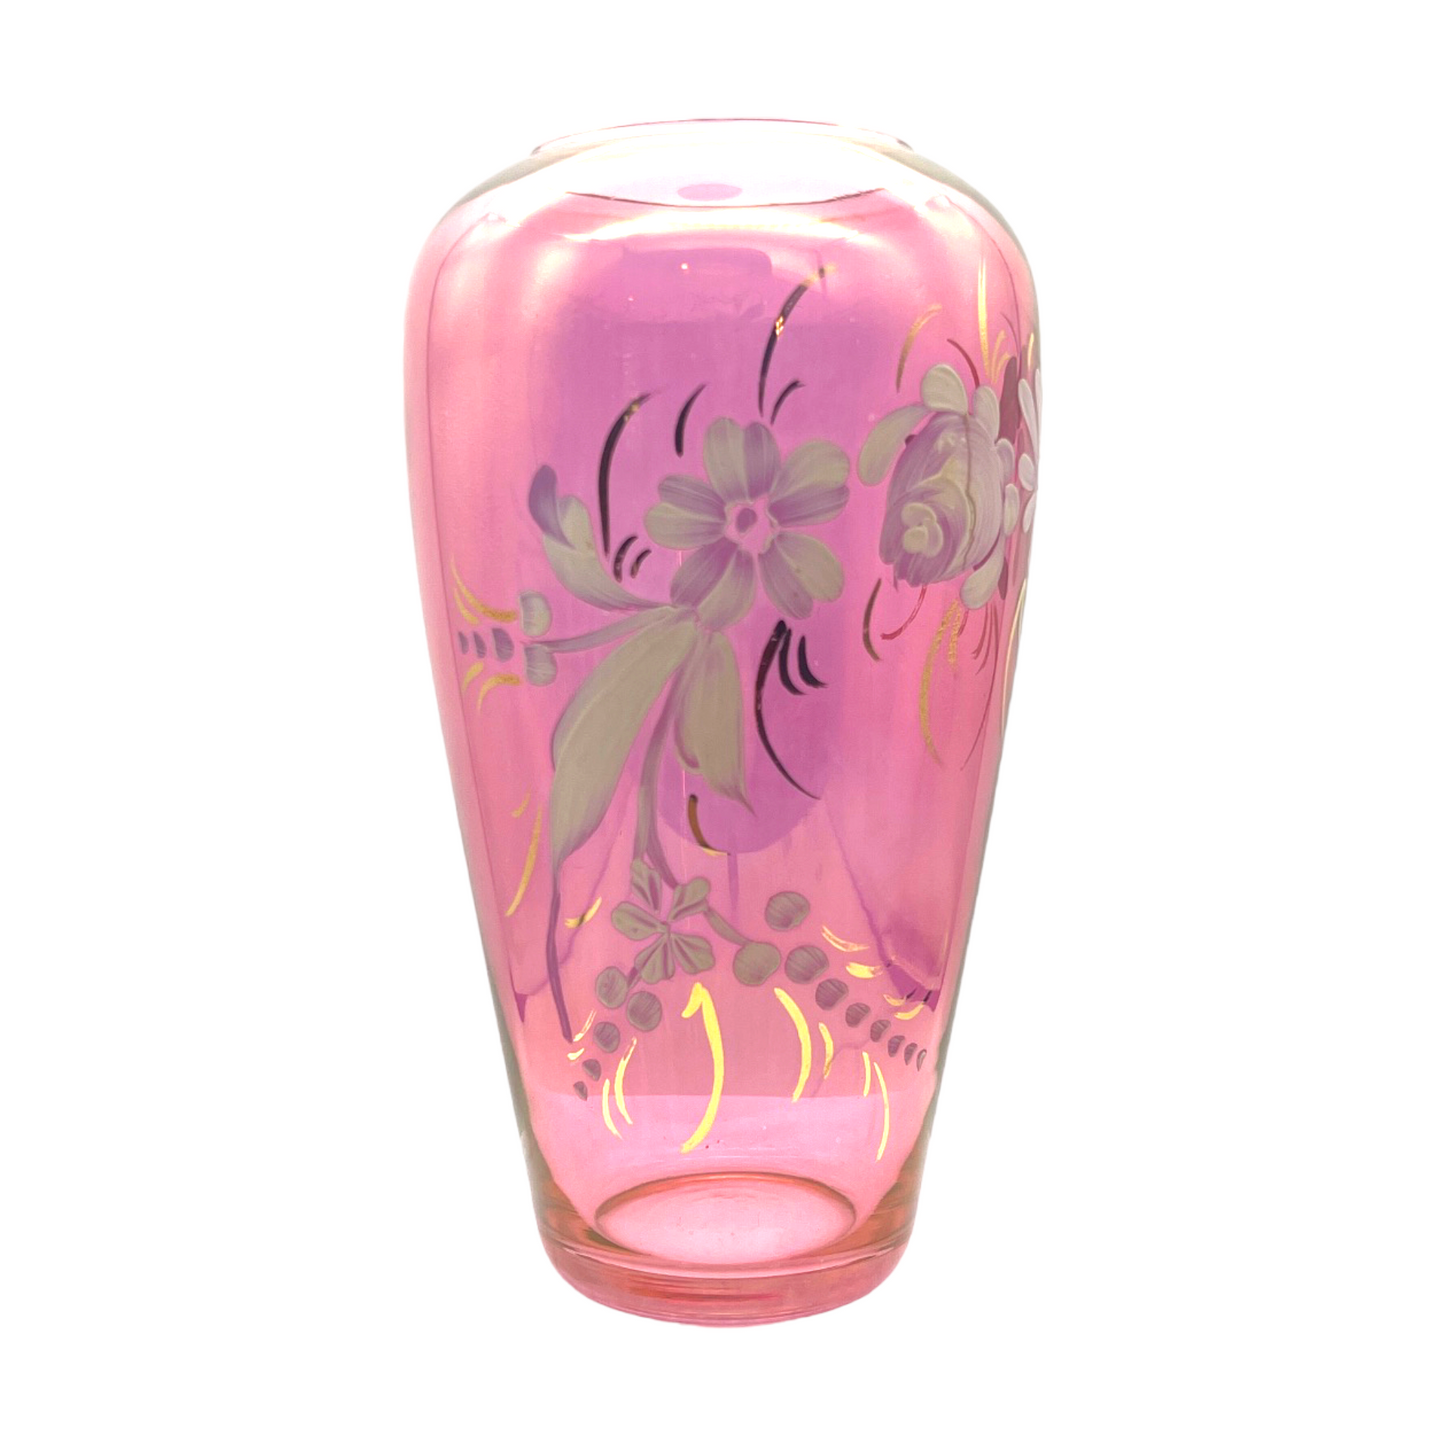 Elegant Vintage Cranberry Vase: Hand-Painted Beauty with Gold Accents